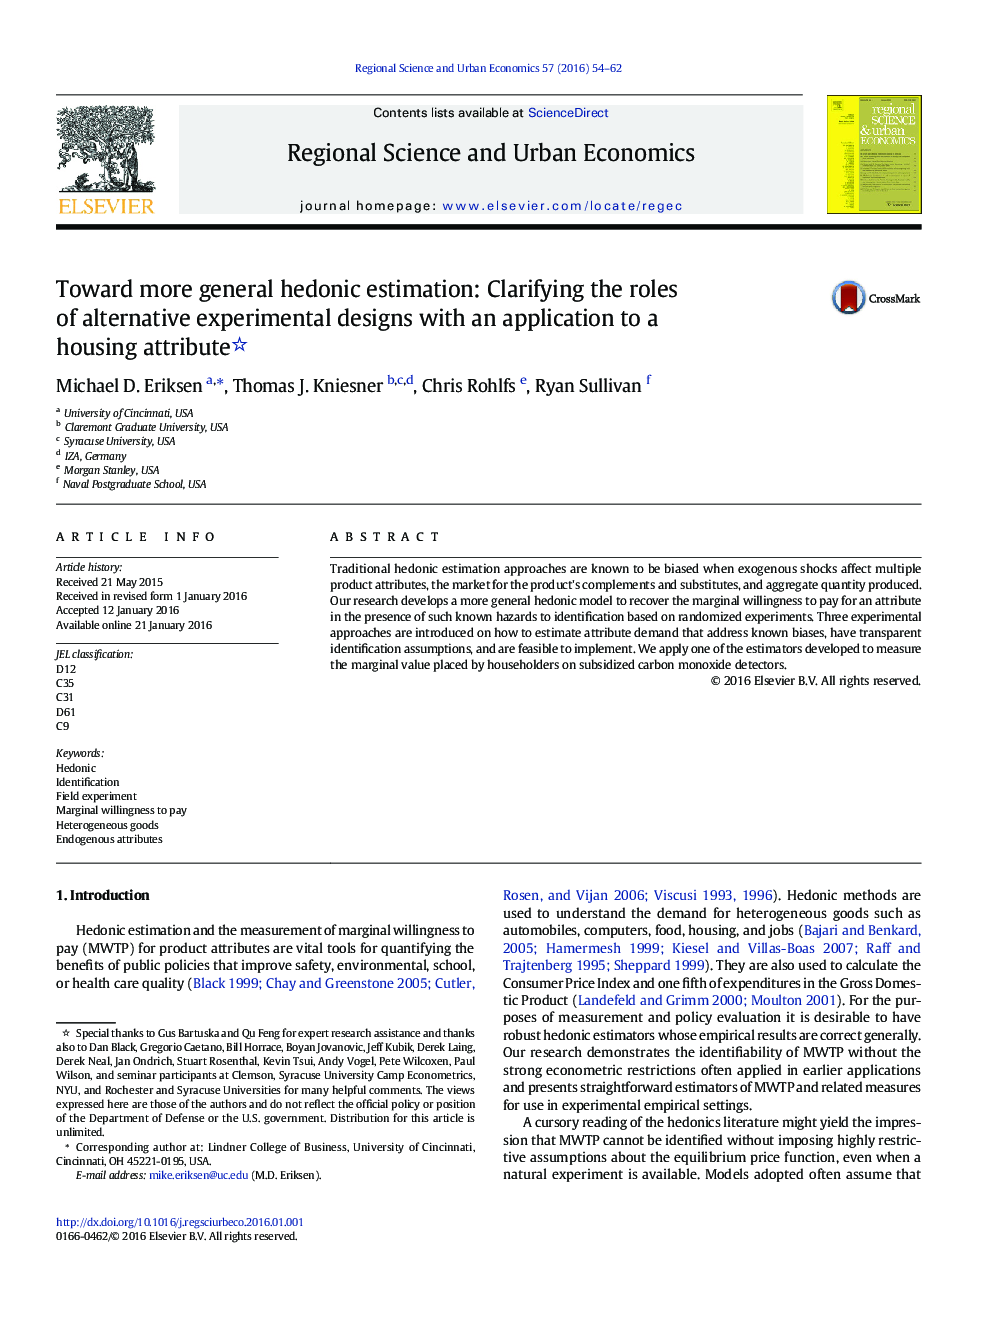 Toward more general hedonic estimation: Clarifying the roles of alternative experimental designs with an application to a housing attribute 